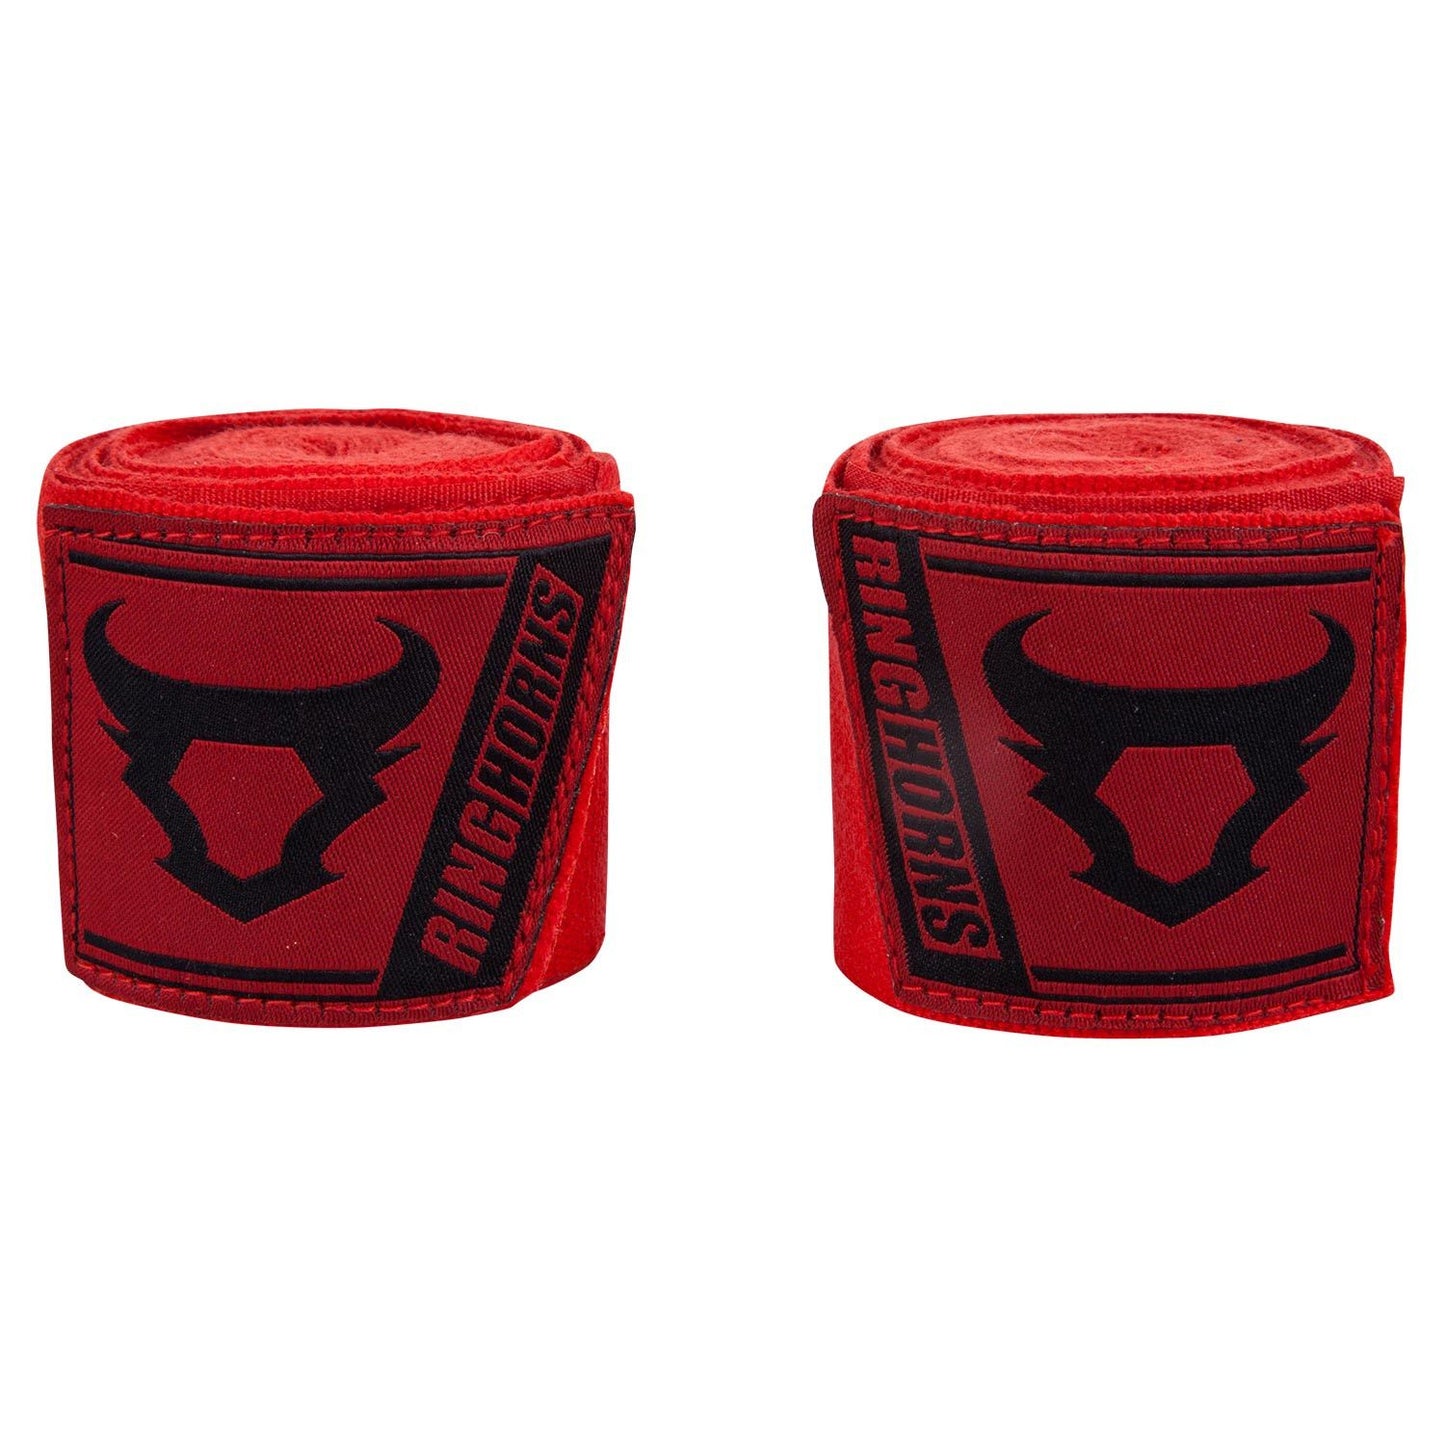 Ringhorns boxing hand wraps - Red